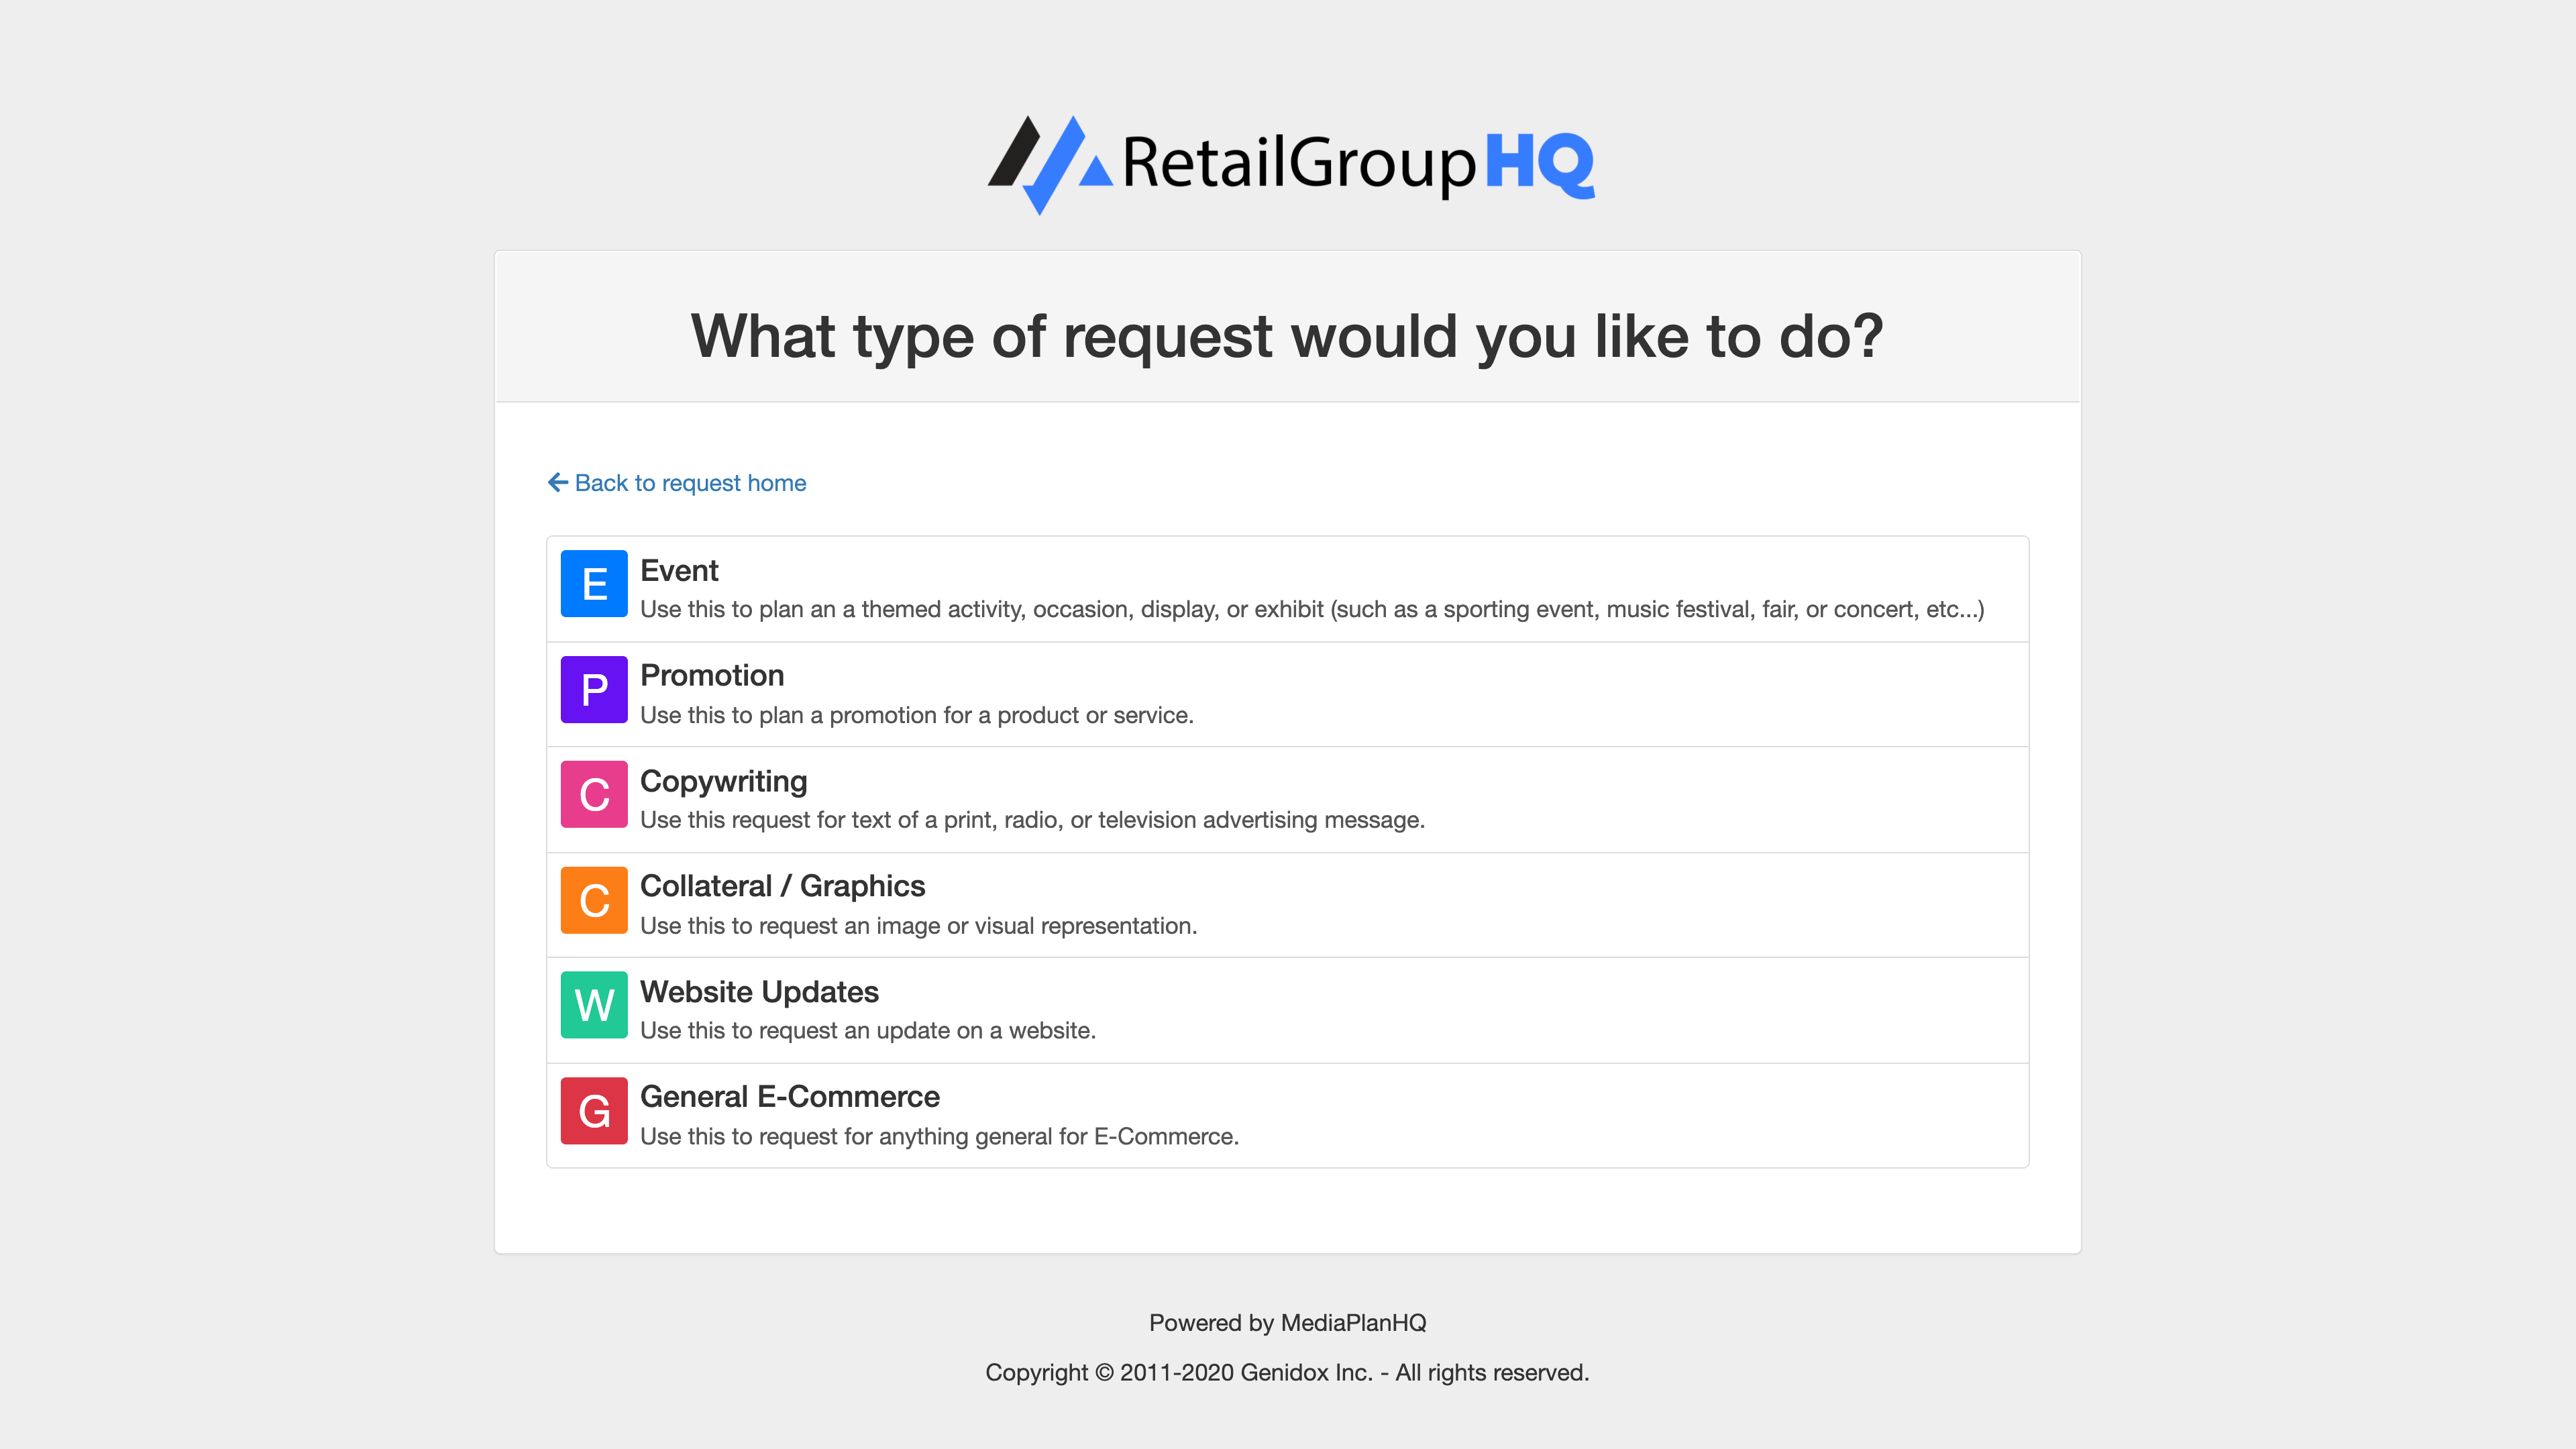 MARKETING REQUEST FORMS - Amaze your clients with an effortless experience to submit and track their marketing requests.